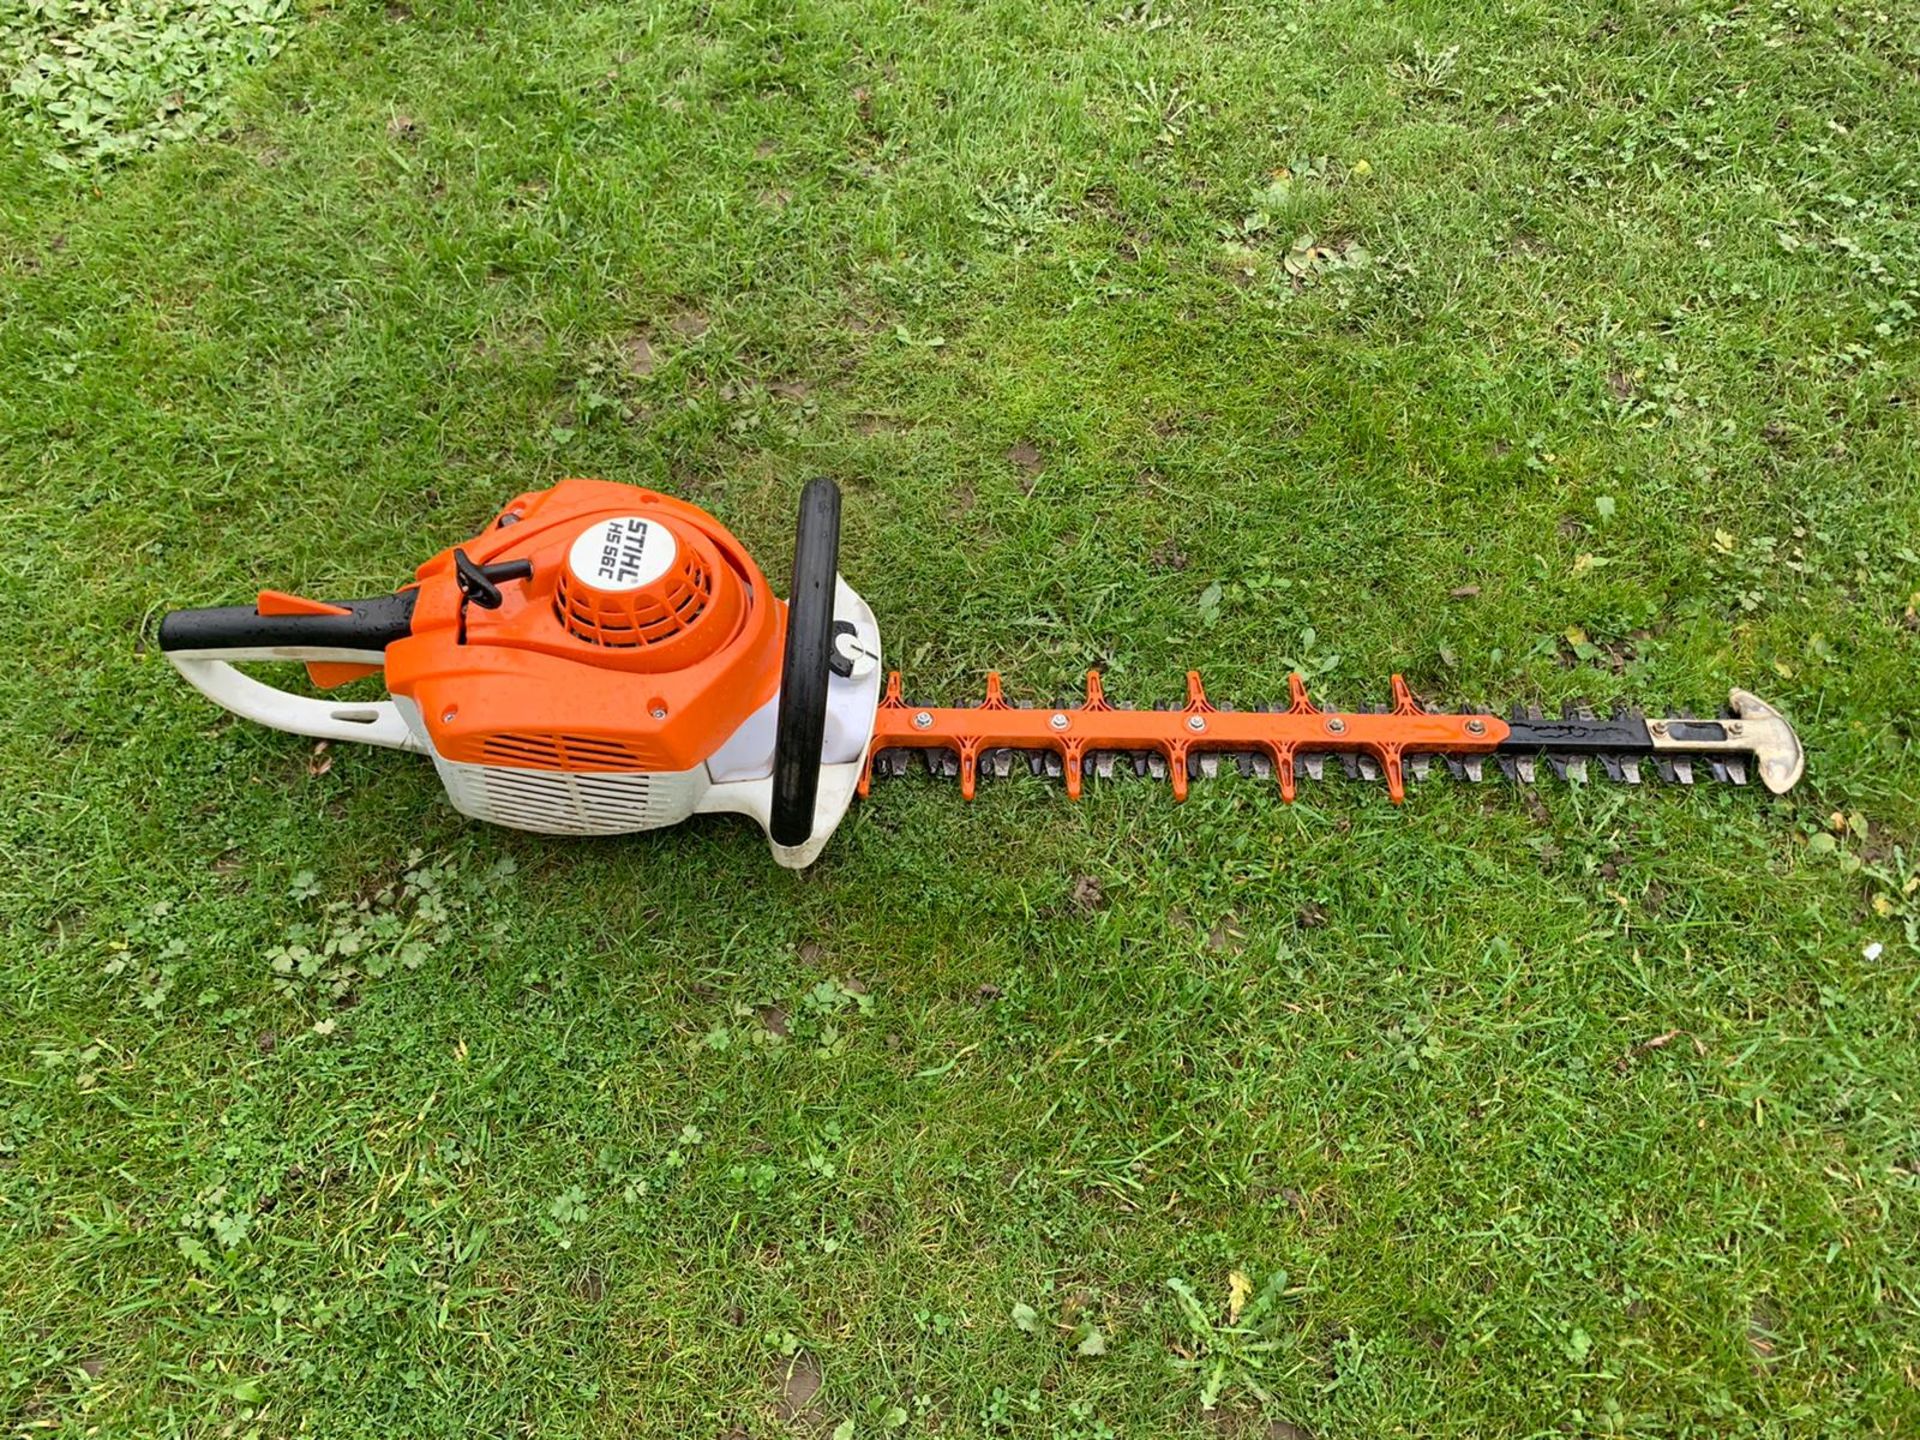 STIHL HS56S HEDGE CUTTER, WORKS, BOUGHT BRAND NEW 2 YEARS AGO, NOT HAD MUCH WORK, EX DEMO CONDITION